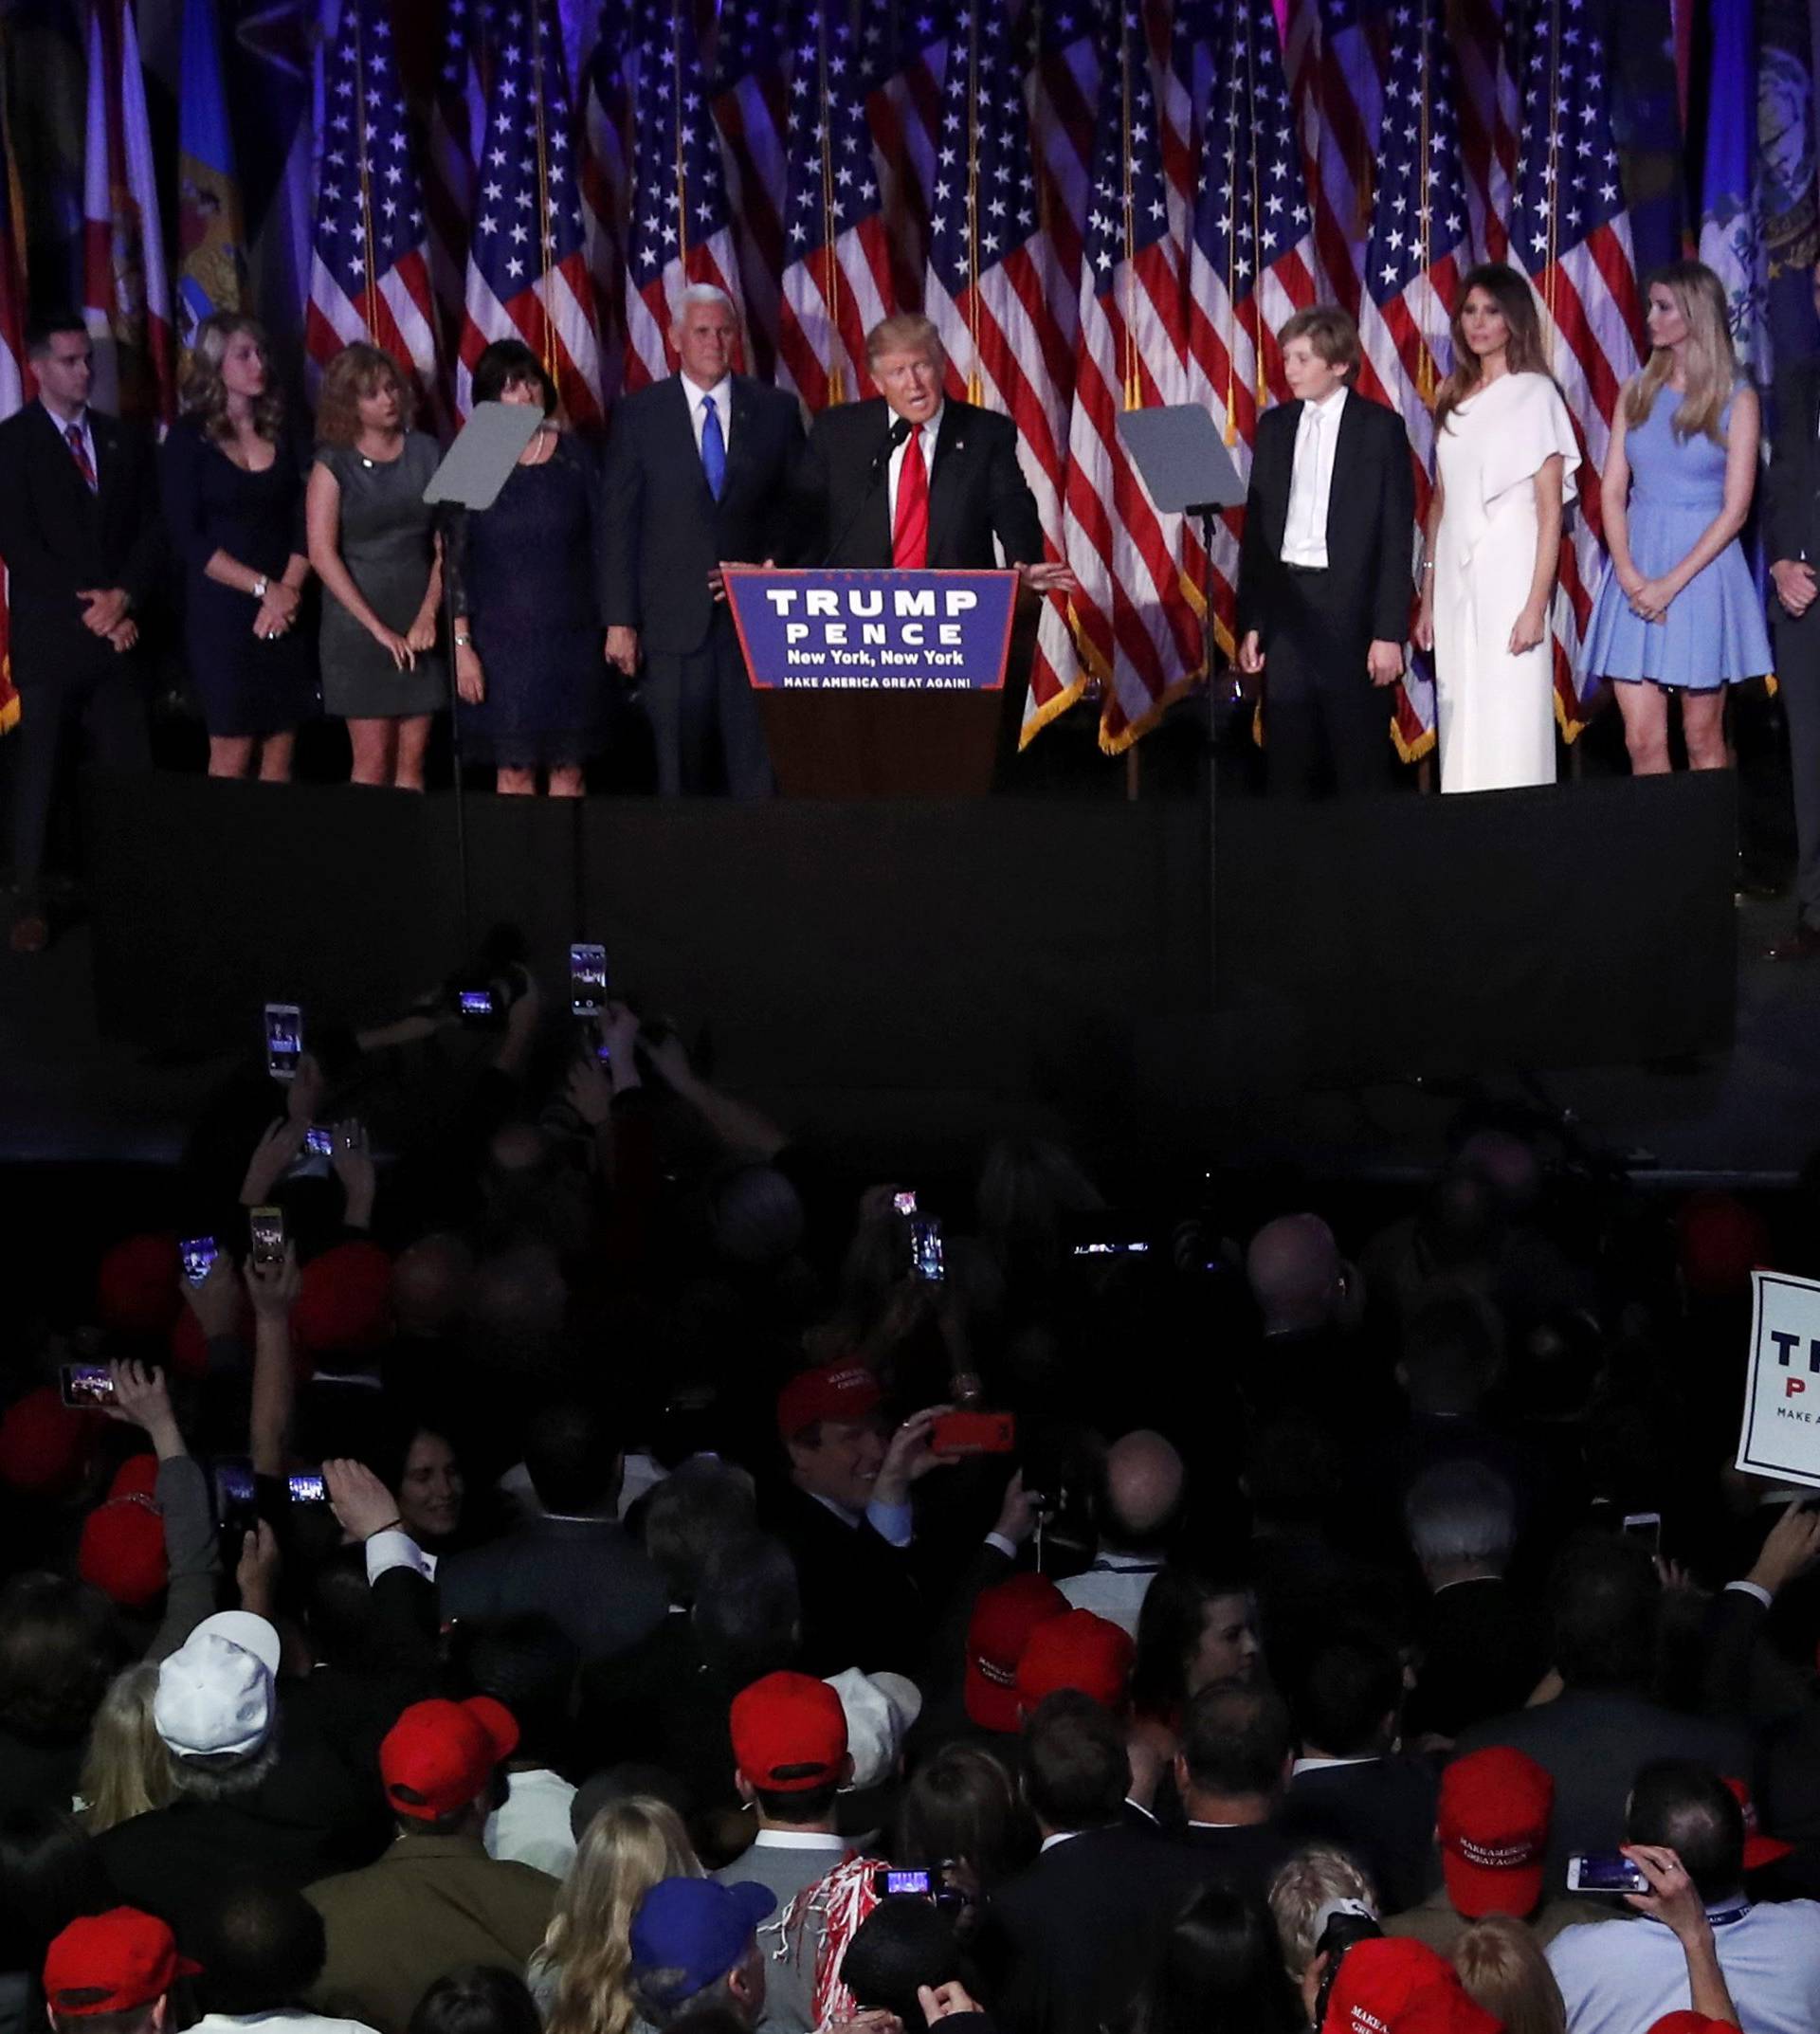 U.S. President-elect Trump is flanked by members of his family as well as relatives of Vice President-elect Pence while speaking at his election night rally in New York